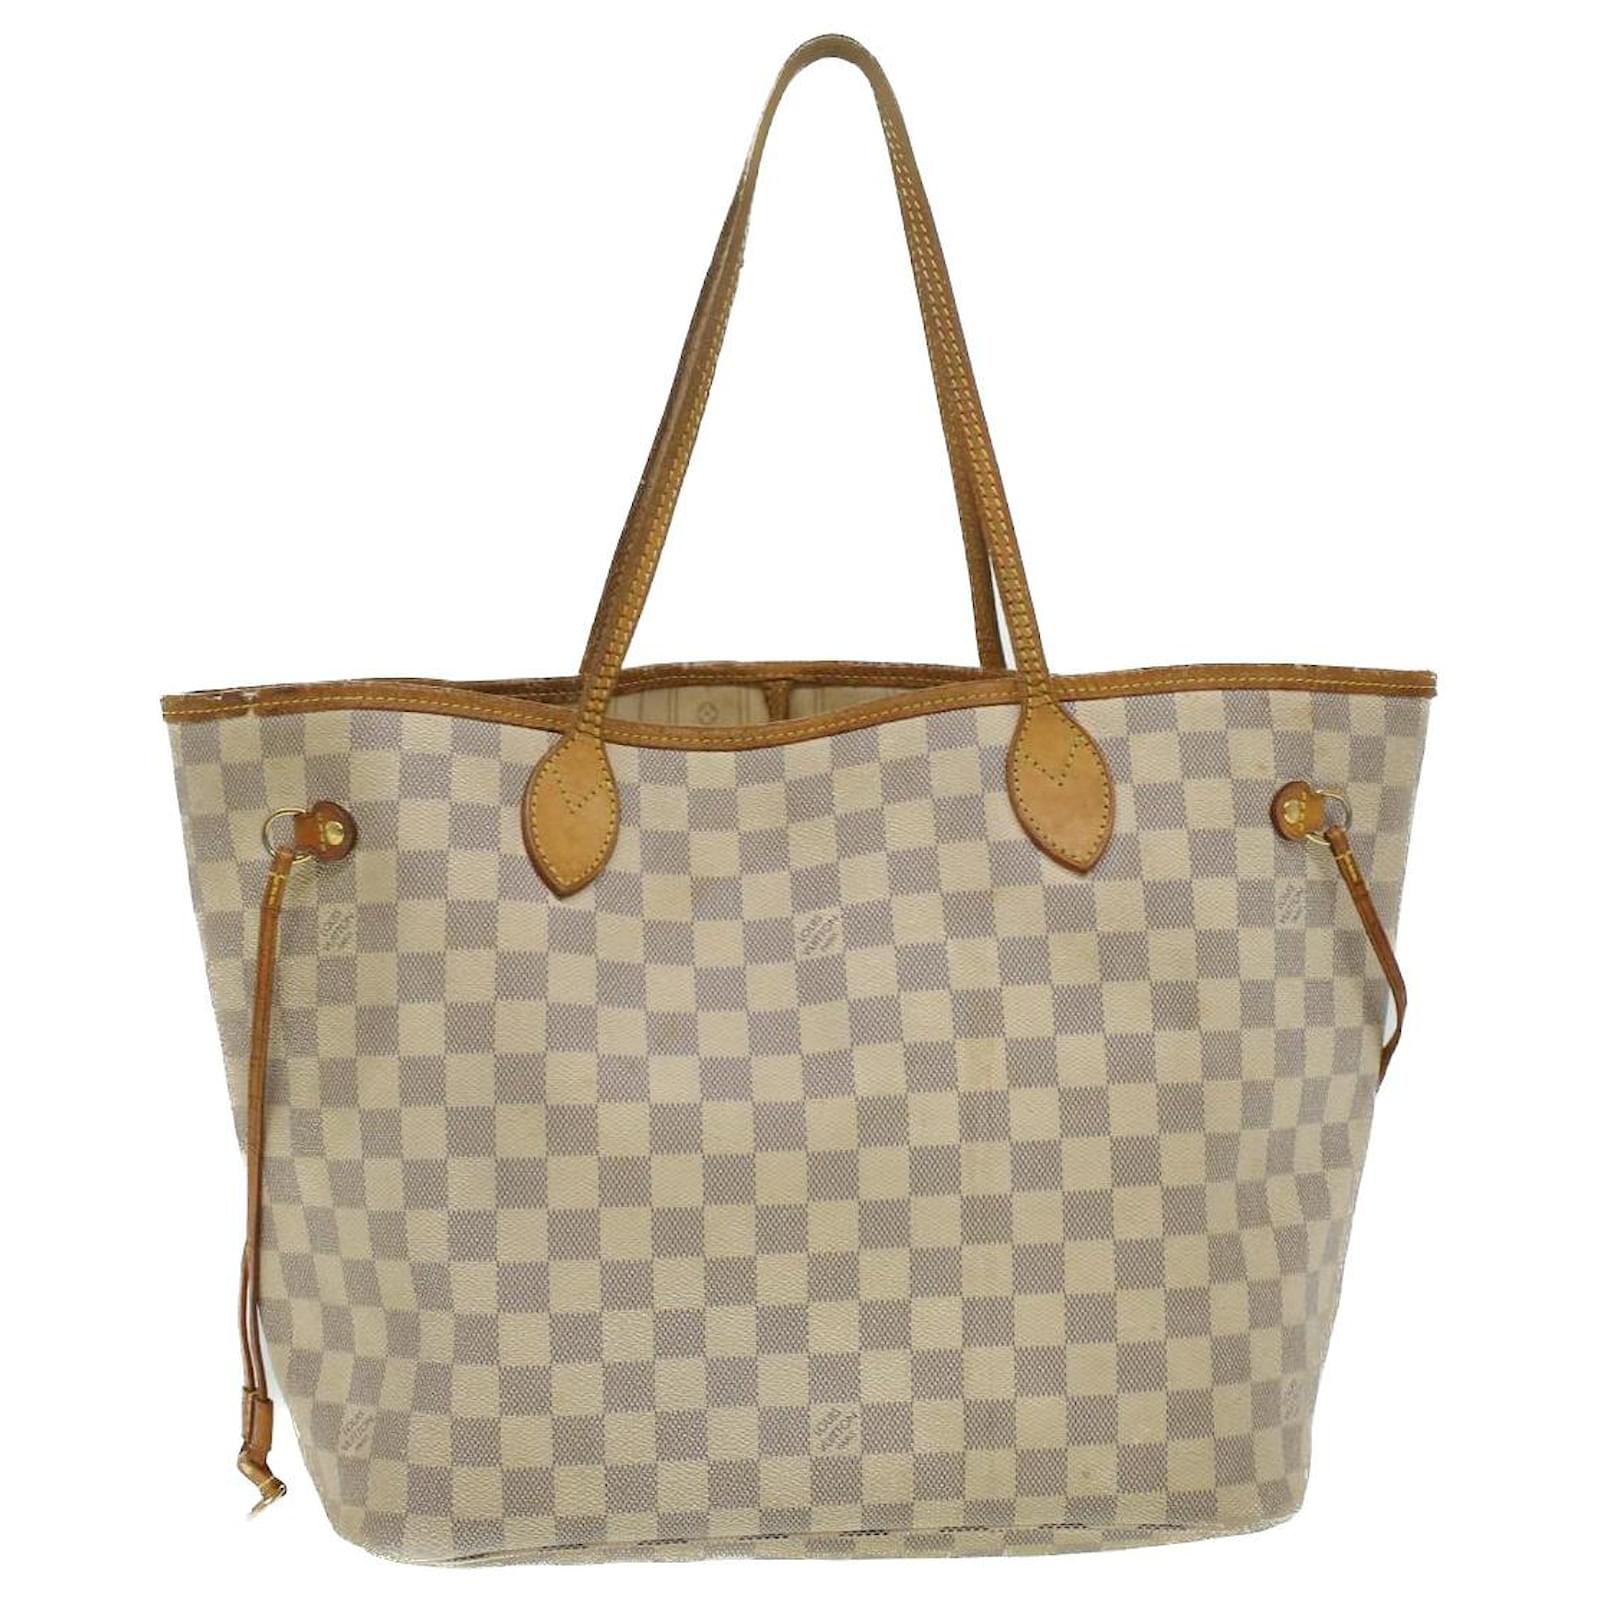 Louis Vuitton Neverfull Mm Dimensions Inches